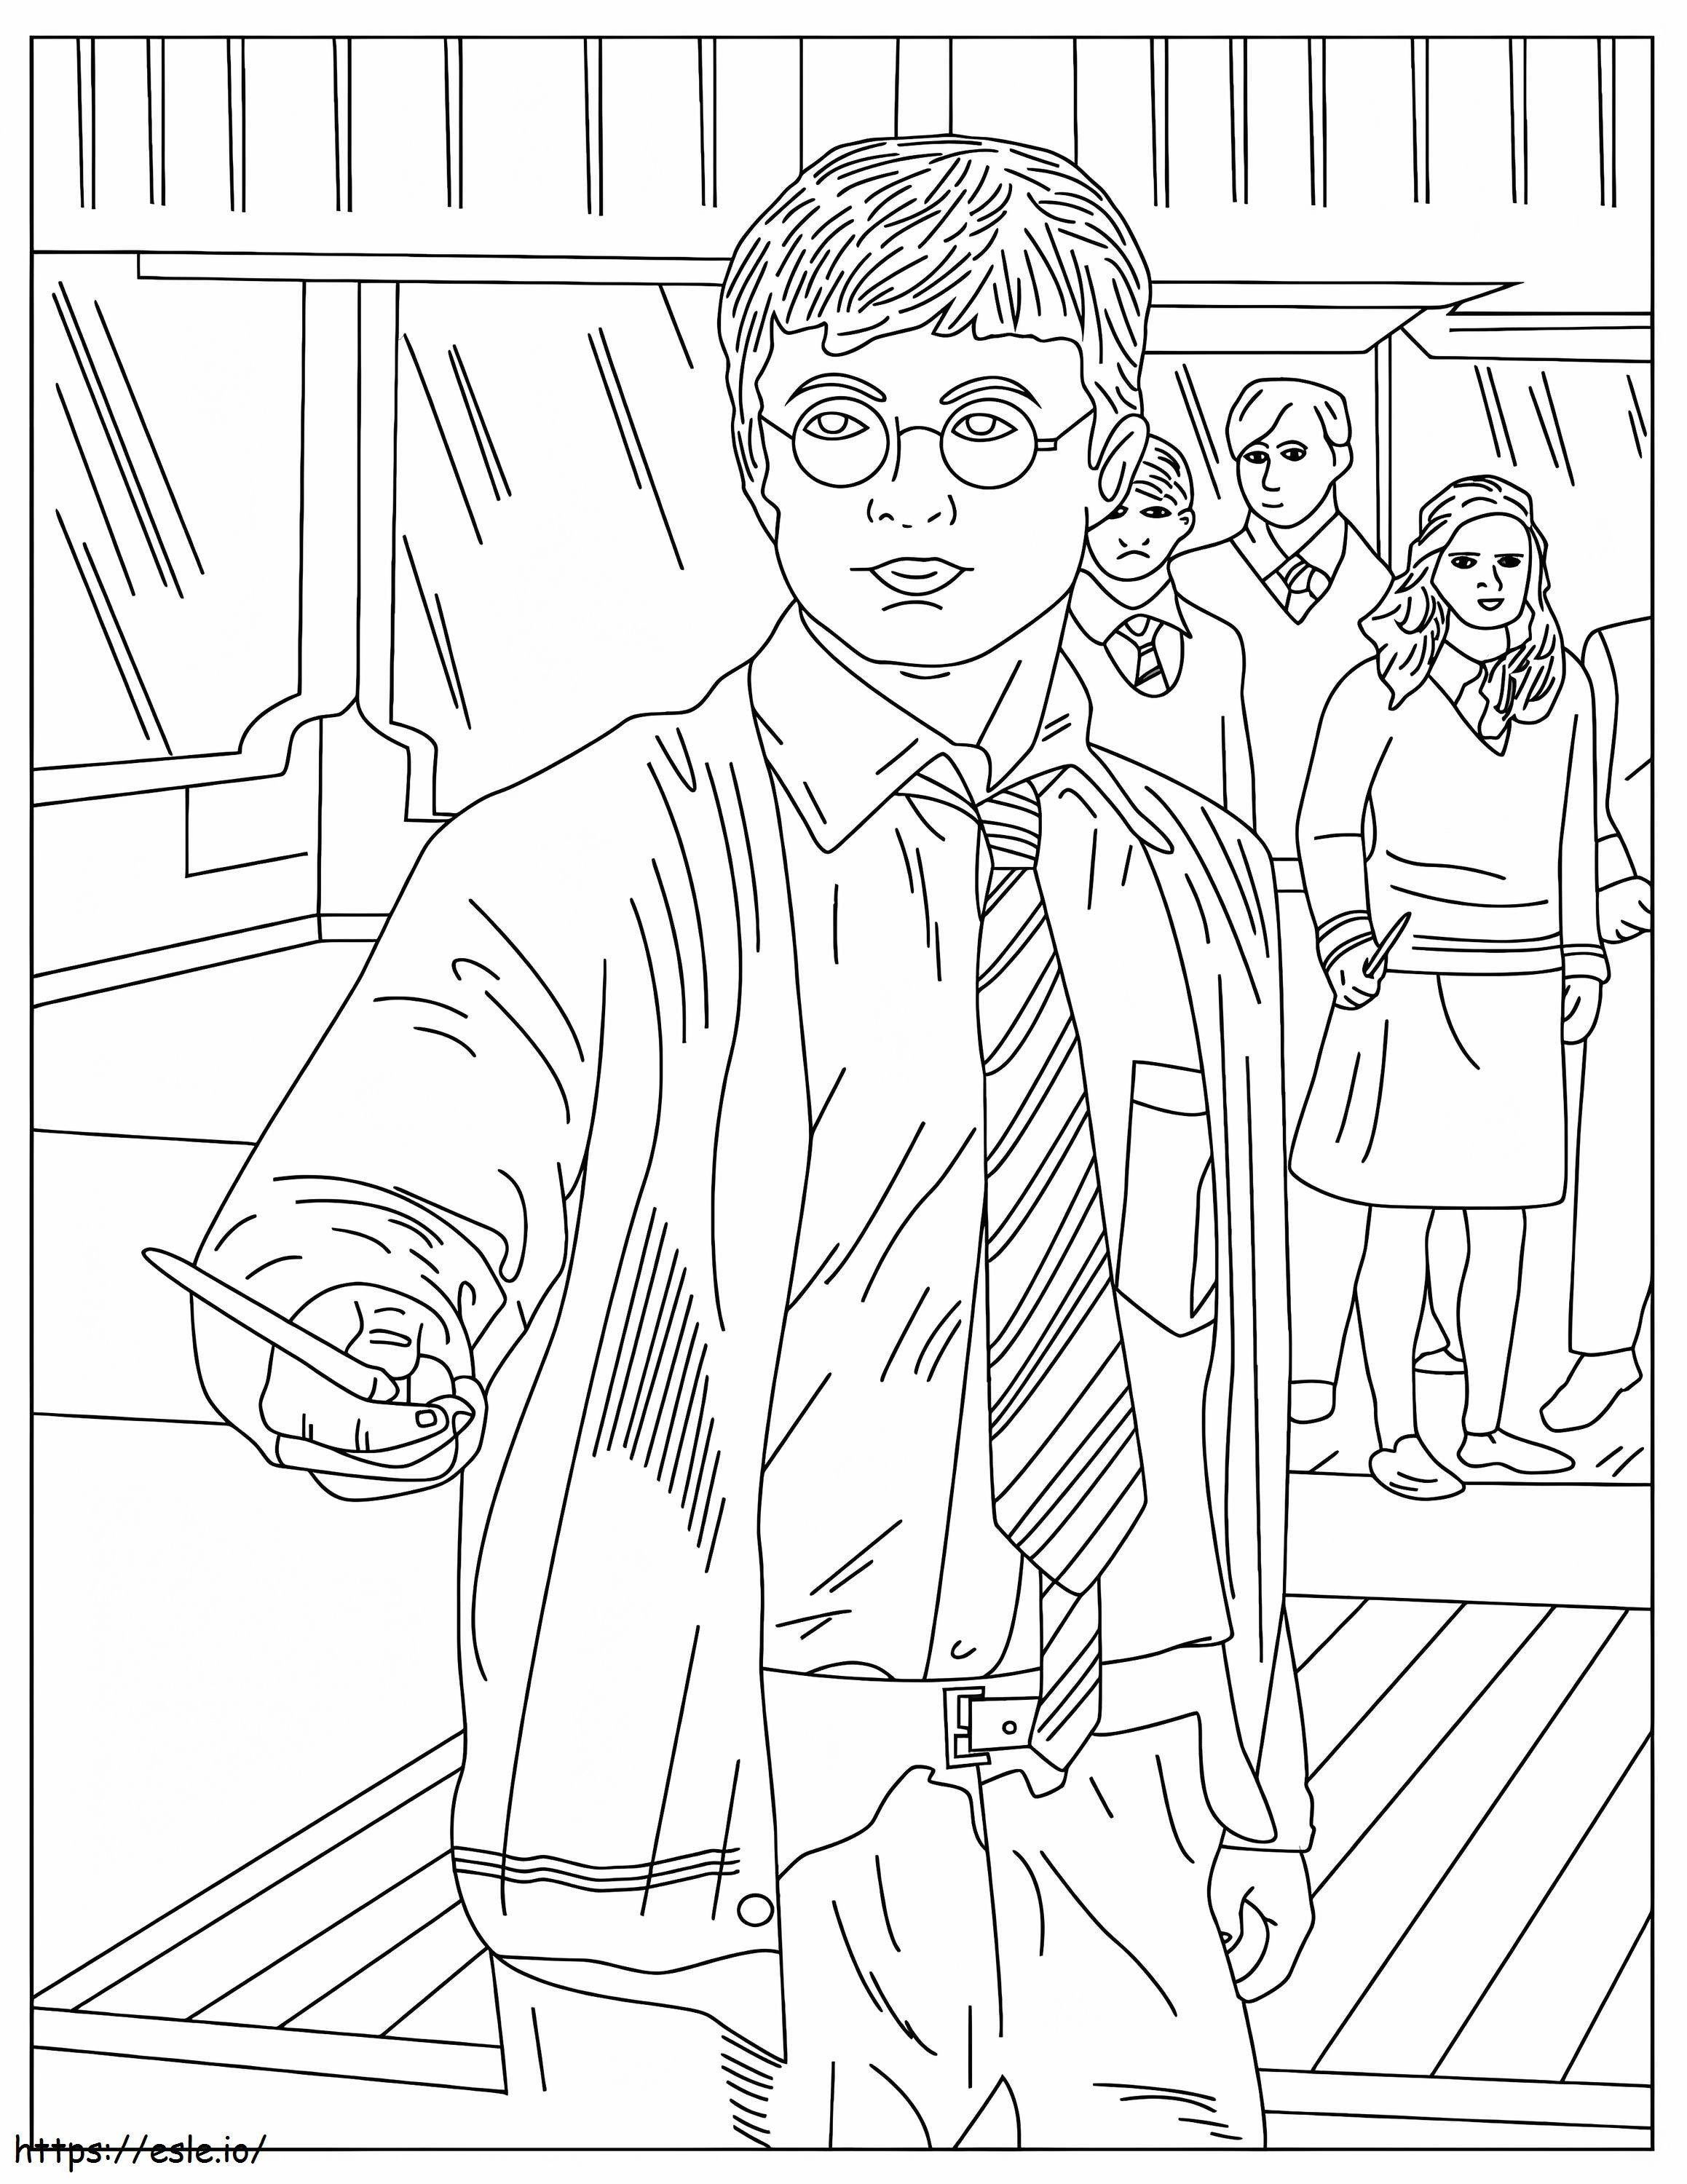 Harry Potter Using Magic Spell coloring page